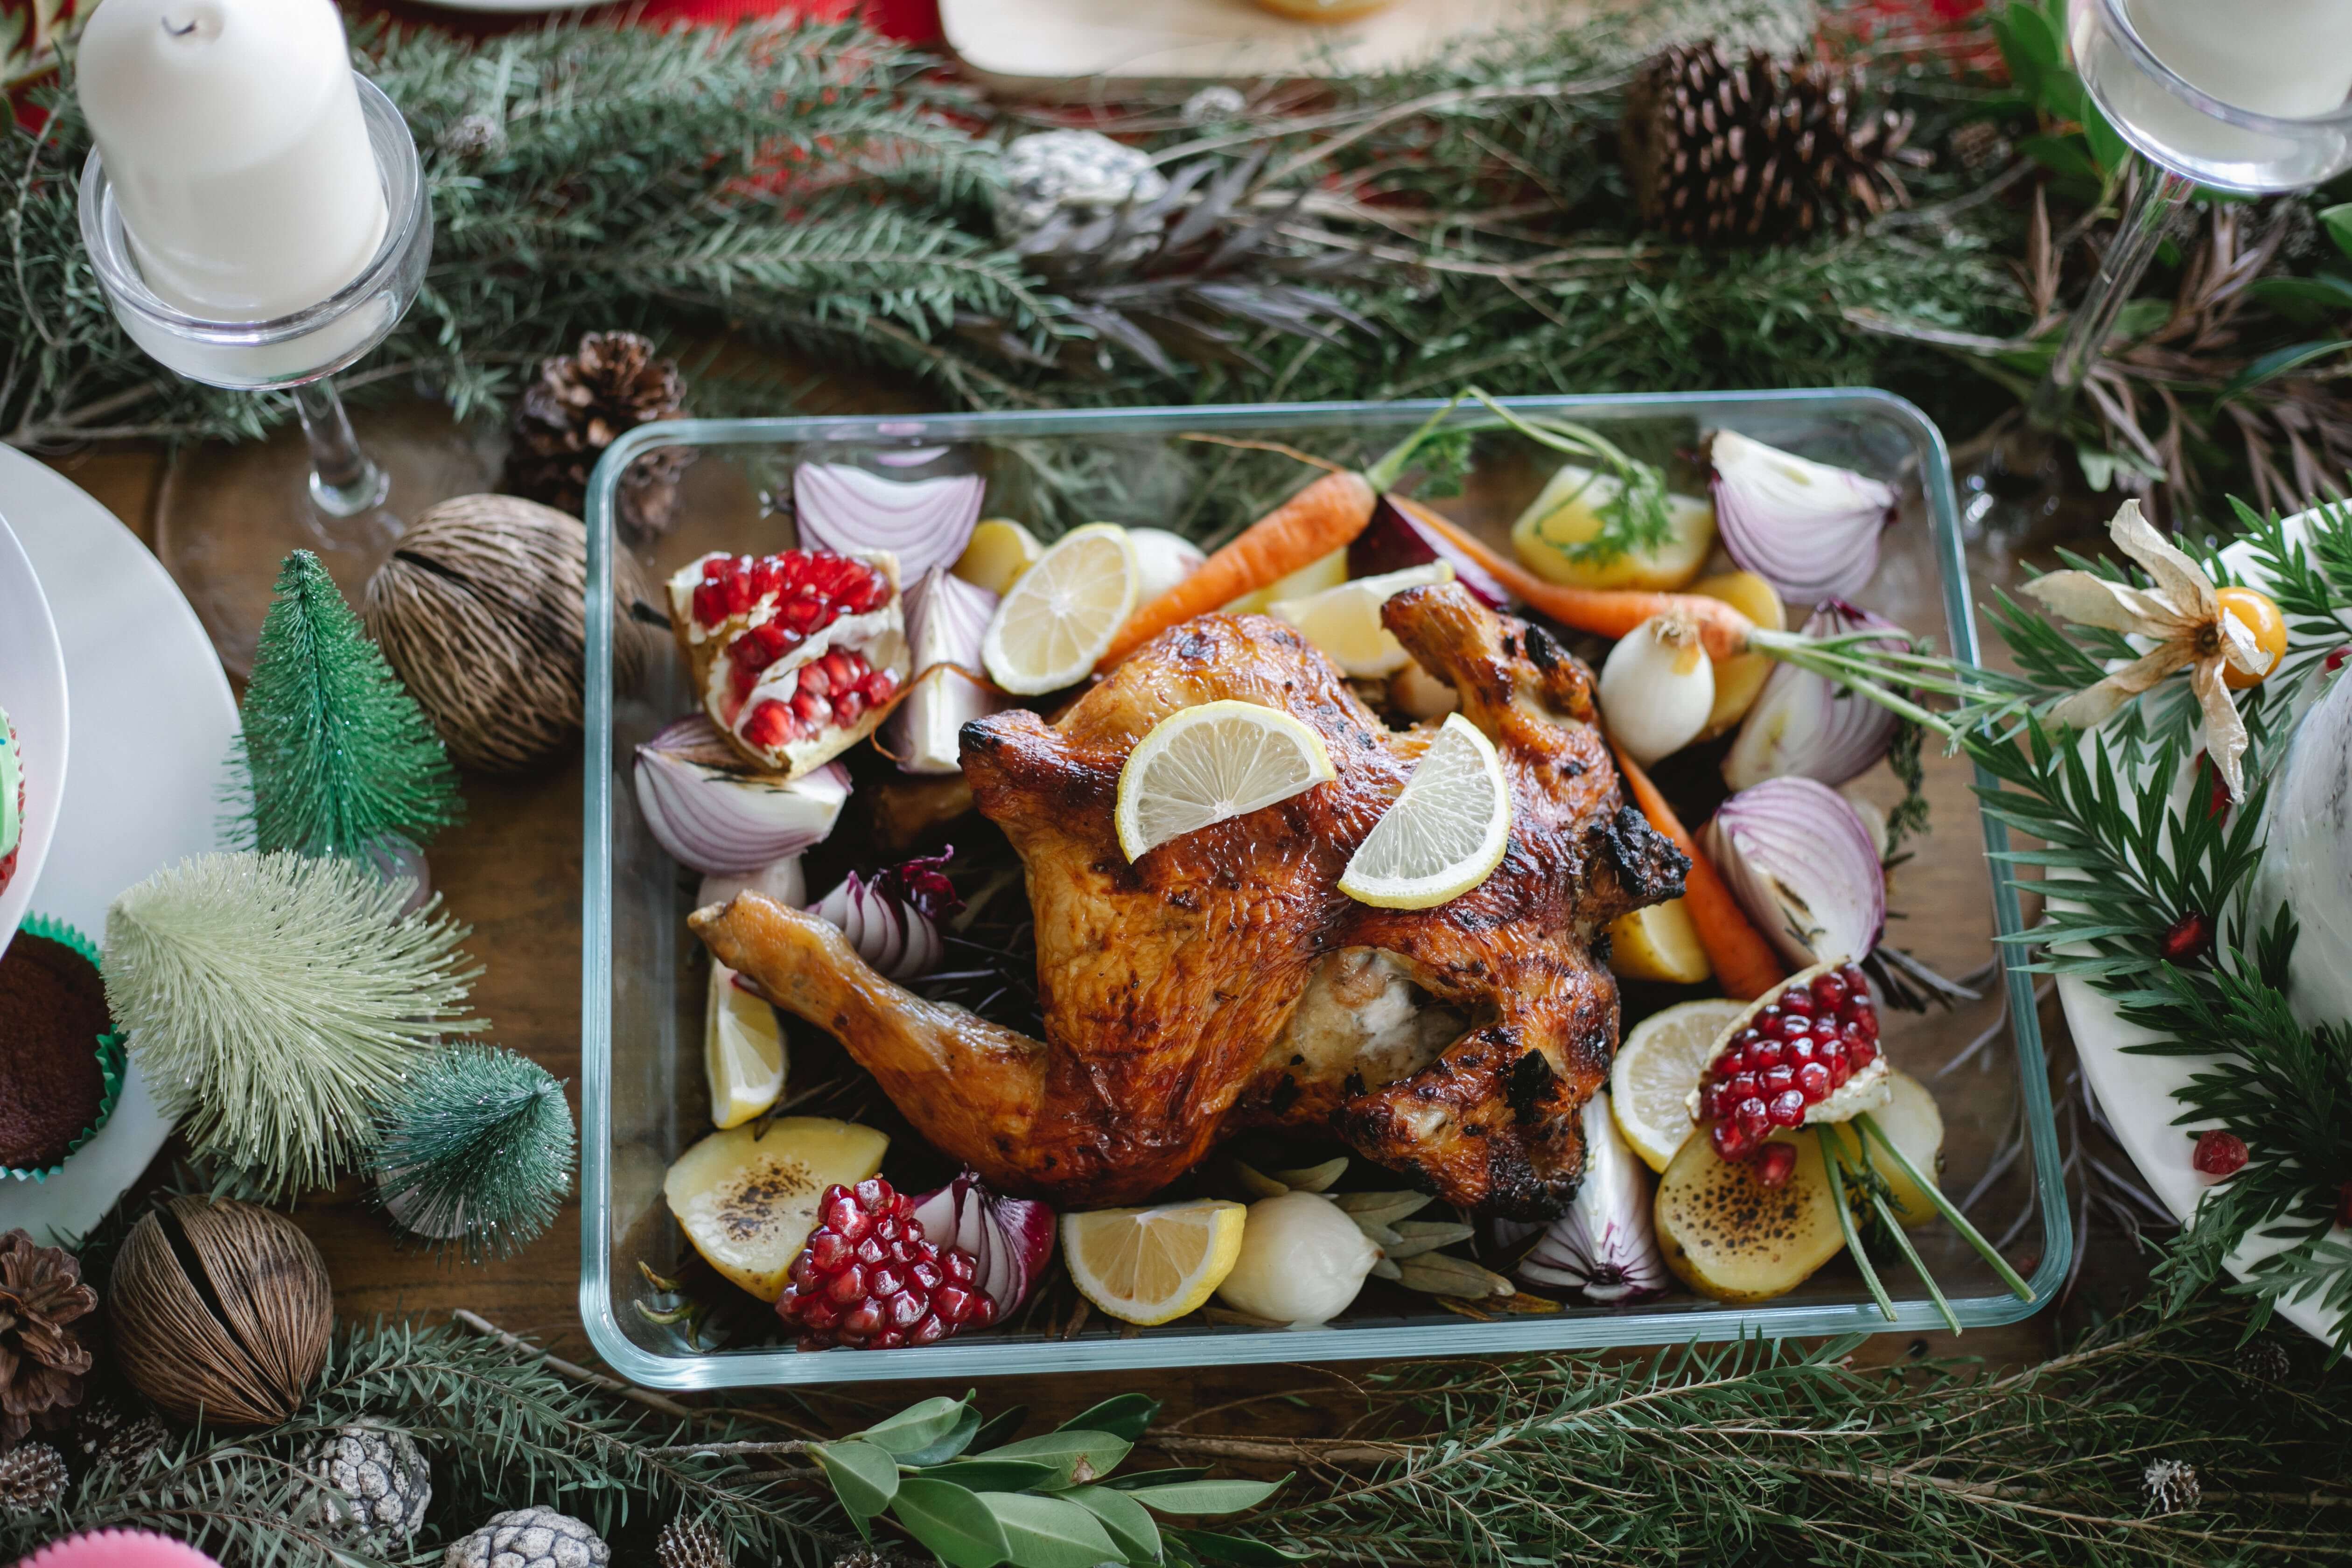 An image of a roast dinner with Christmas herbs and spices.